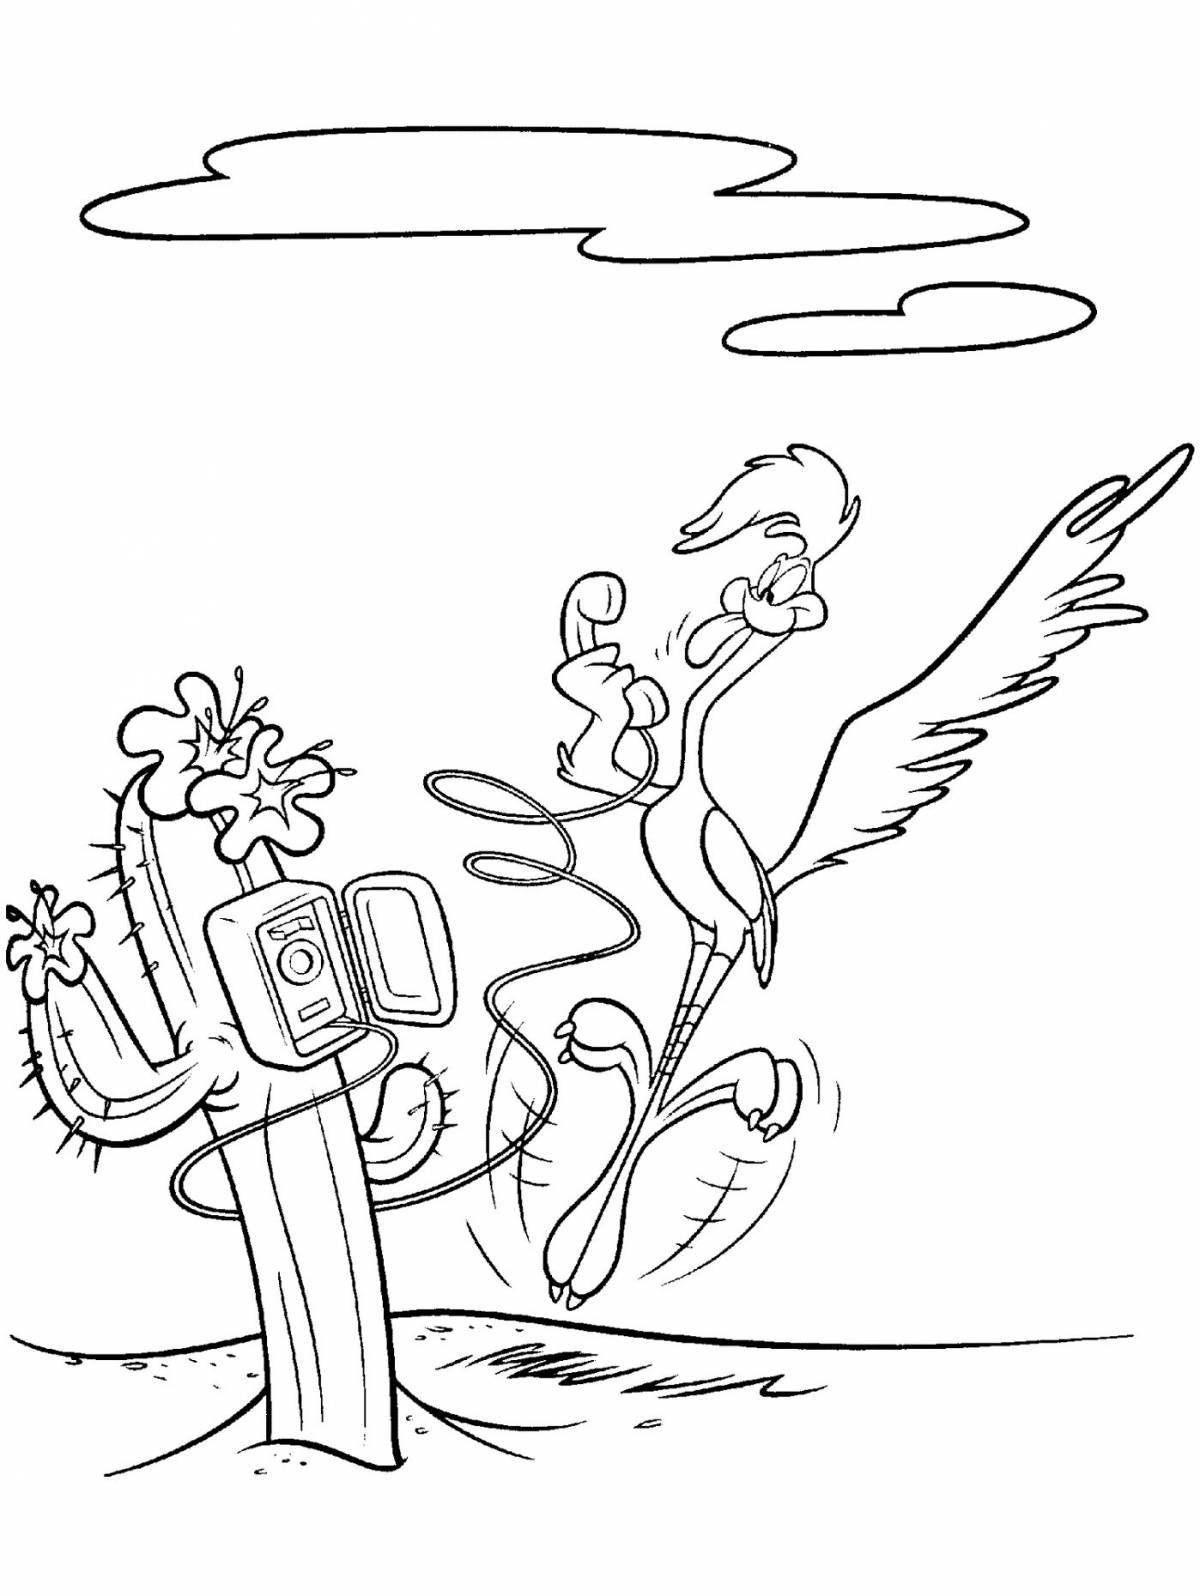 Playful road runner coloring page